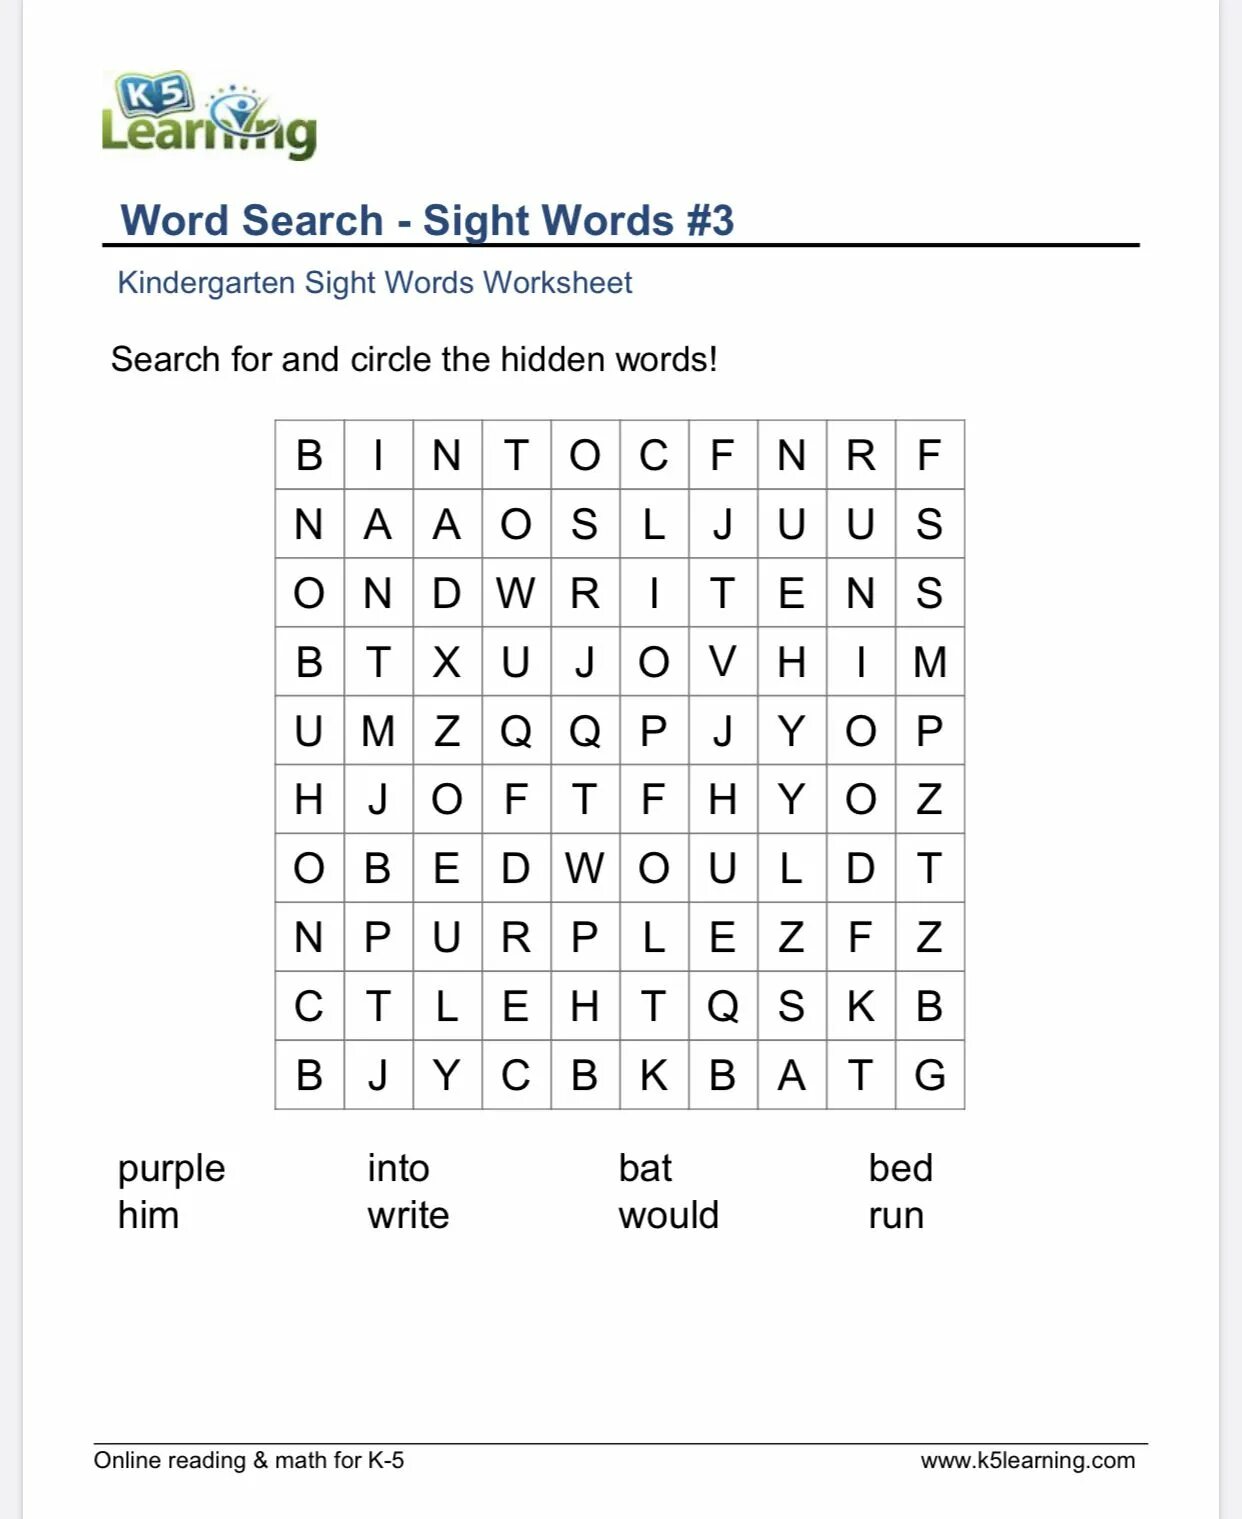 One word for three. Sport Vocabulary Wordsearch Puzzle ответы. Worksheet 4 Grade английский. Wordsearch 3 Grade. Search Words 1 класс.